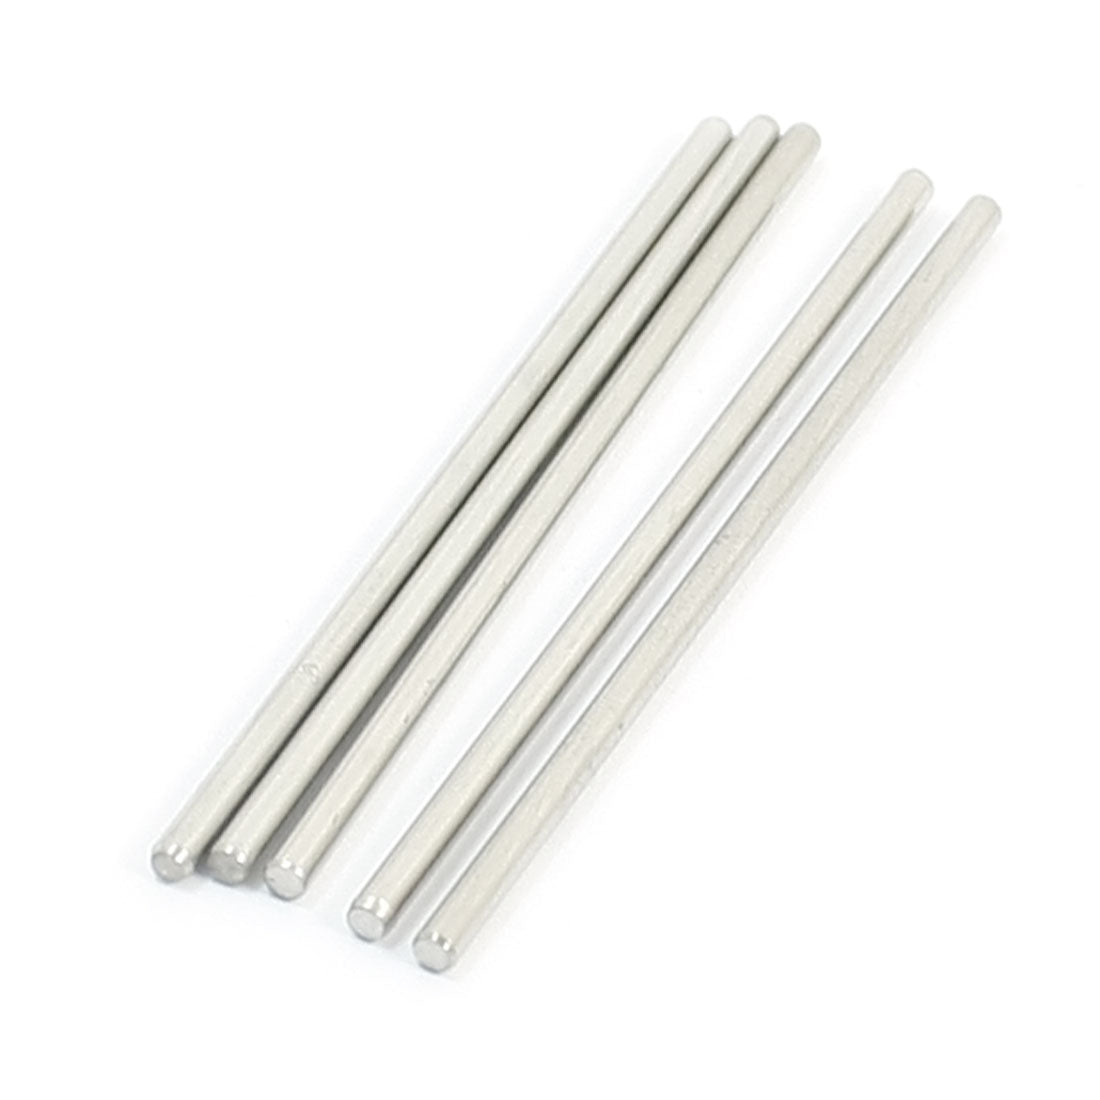 uxcell Uxcell 5PCS 60mm x 2mm Stainless Steel Round Rod Axle Bars for Boat Toys